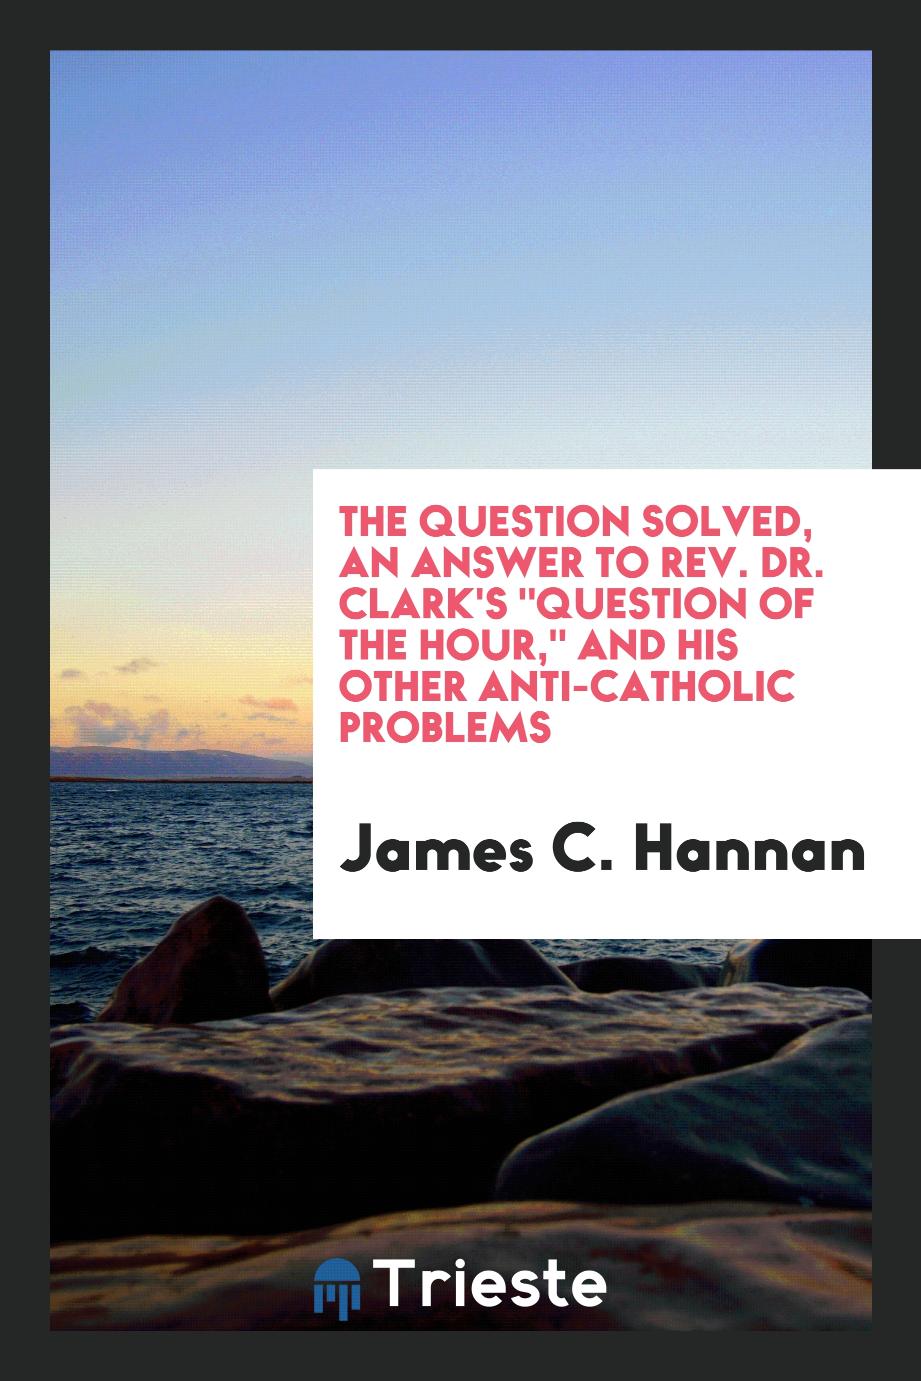 The question solved, an answer to Rev. Dr. Clark's "Question of the Hour," and his other anti-Catholic problems